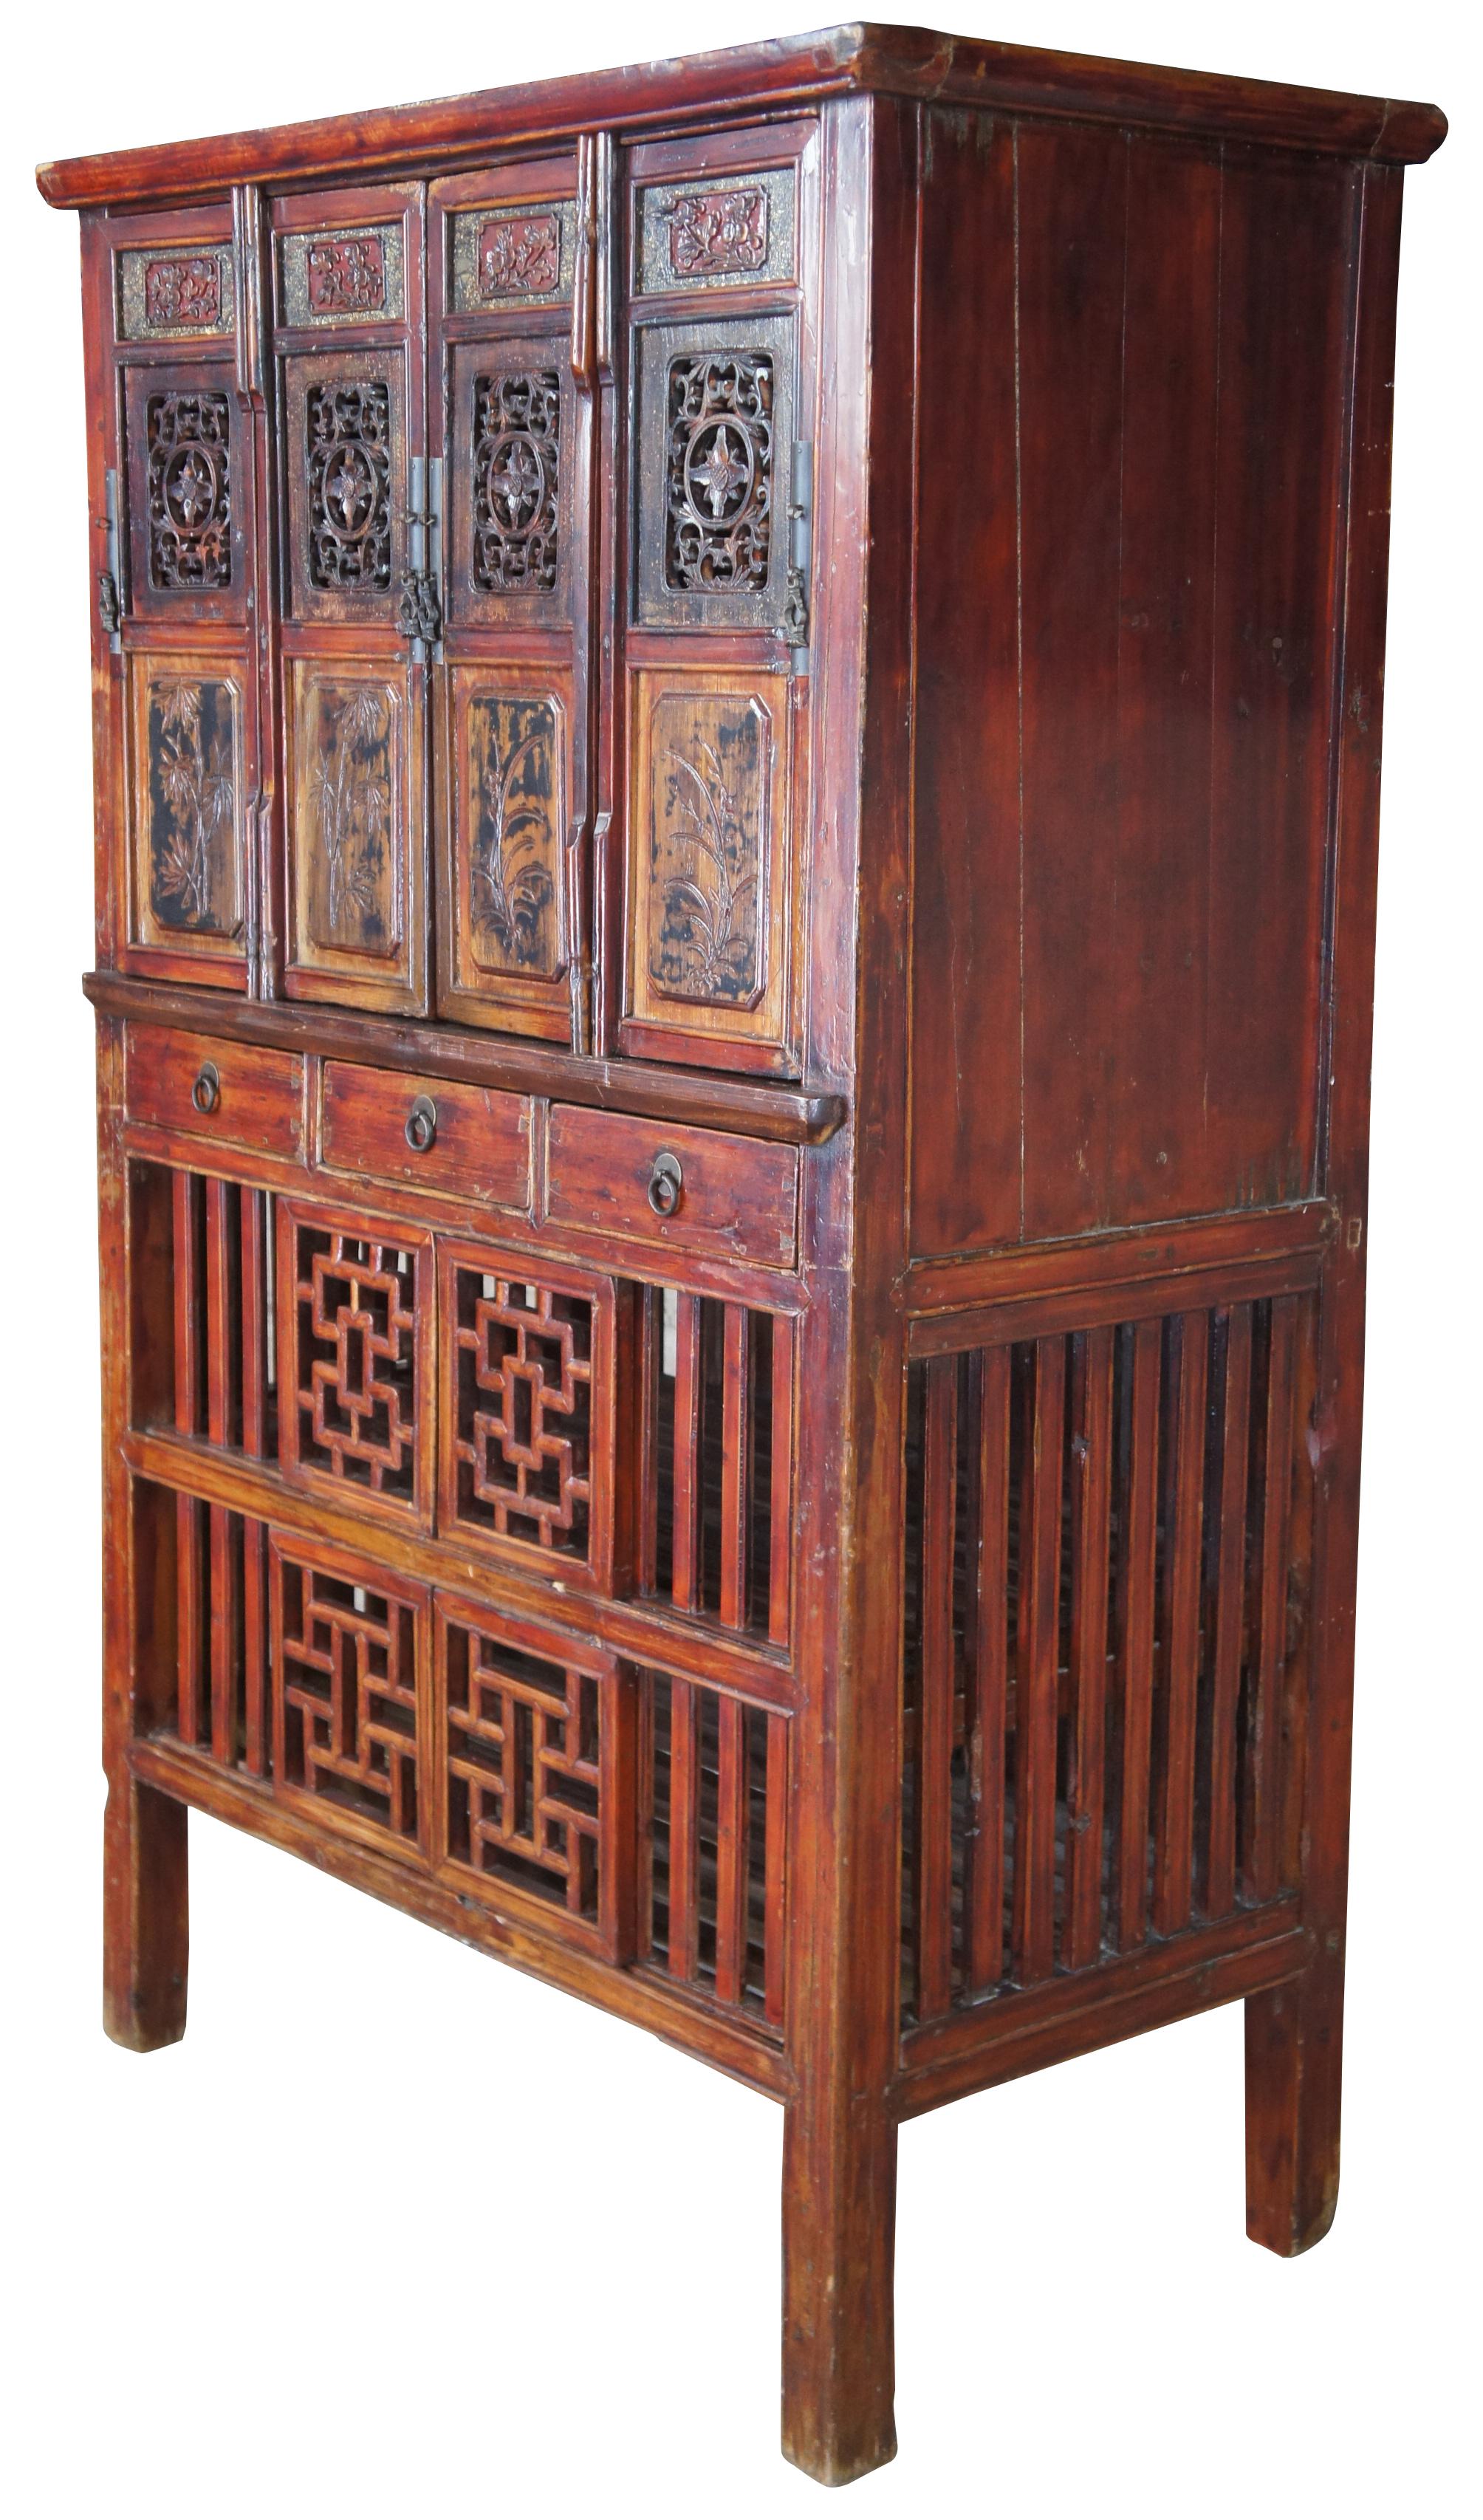 Antique Chinese Kitchen cabinet or cupboard. Made from Elm with intricate fretwork and finish in red, circa late 19th century. Features mortise and tenon joints, 3 drawers, adjustable lower panels and removable top doors.

Originally designed to